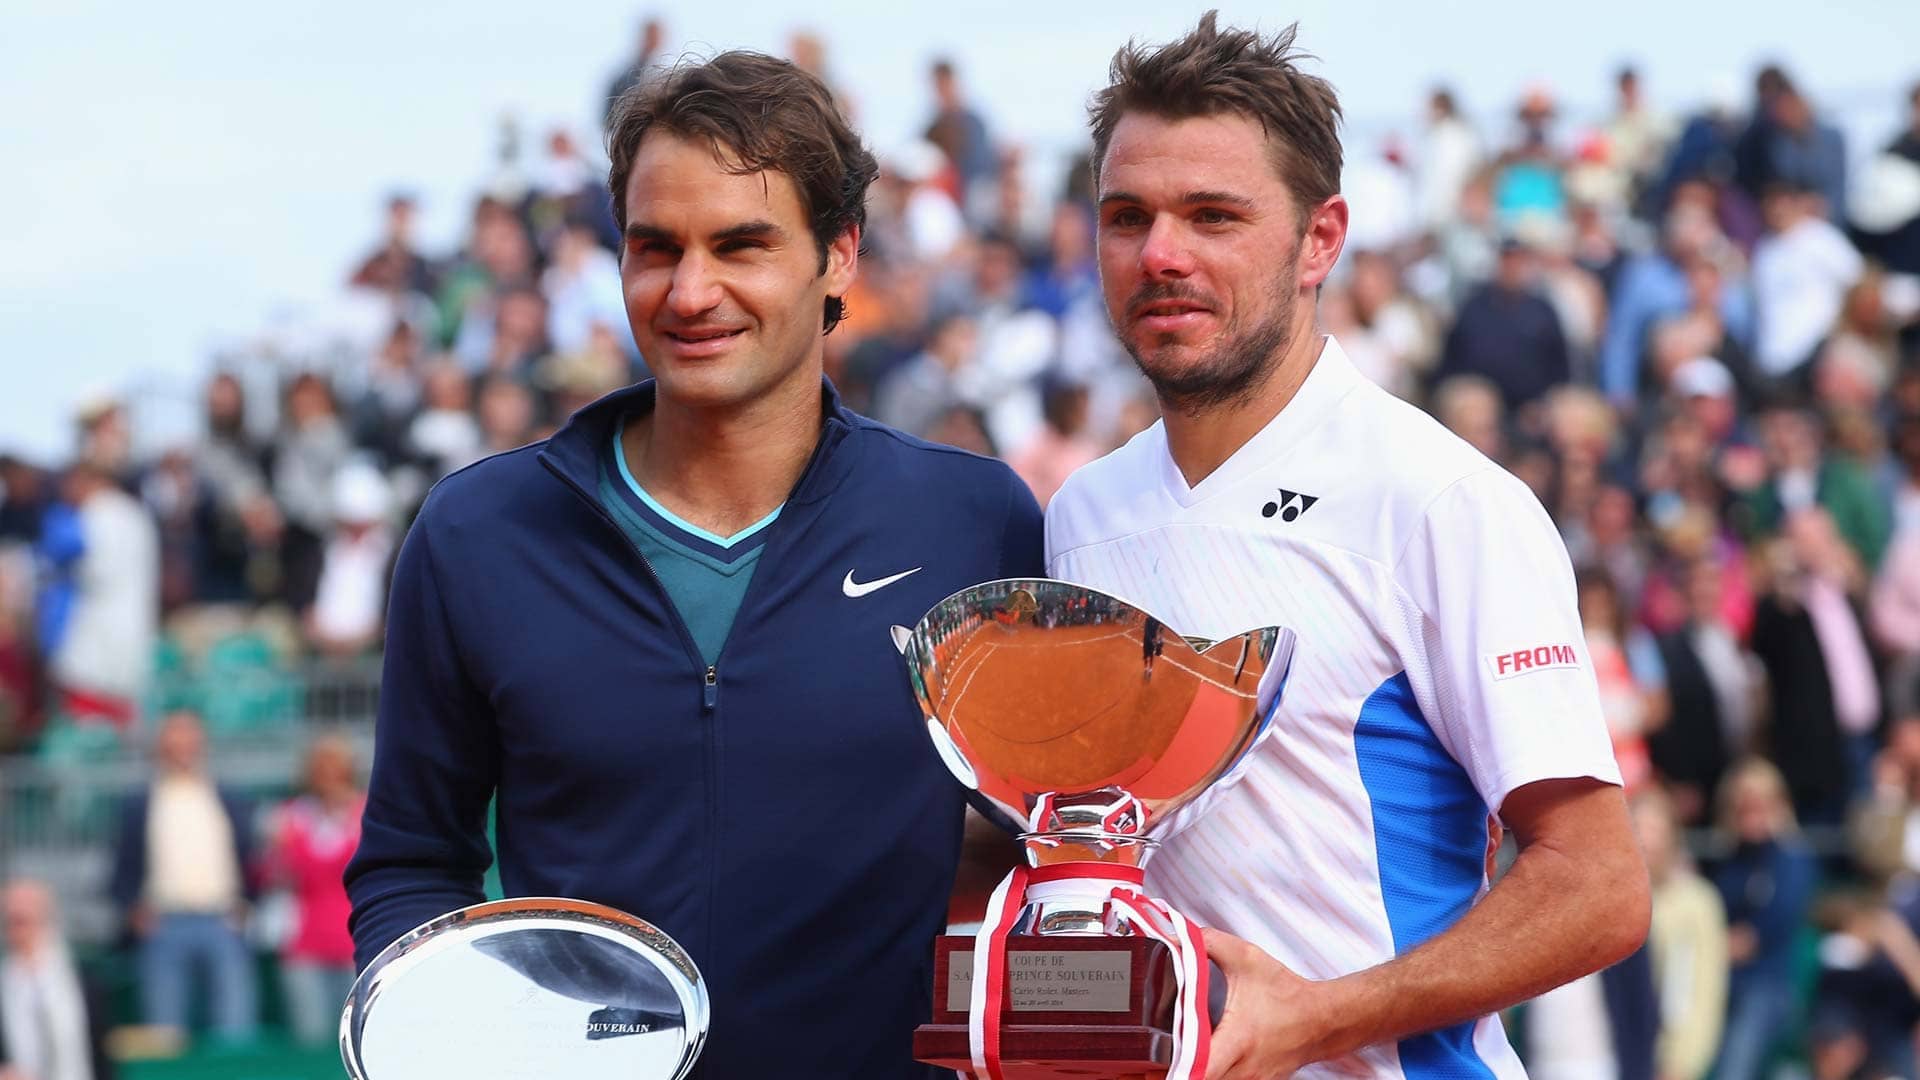 Stan Wawrinka beat Roger Federer in an all-Swiss final at the 2014 Rolex Monte-Carlo Masters.